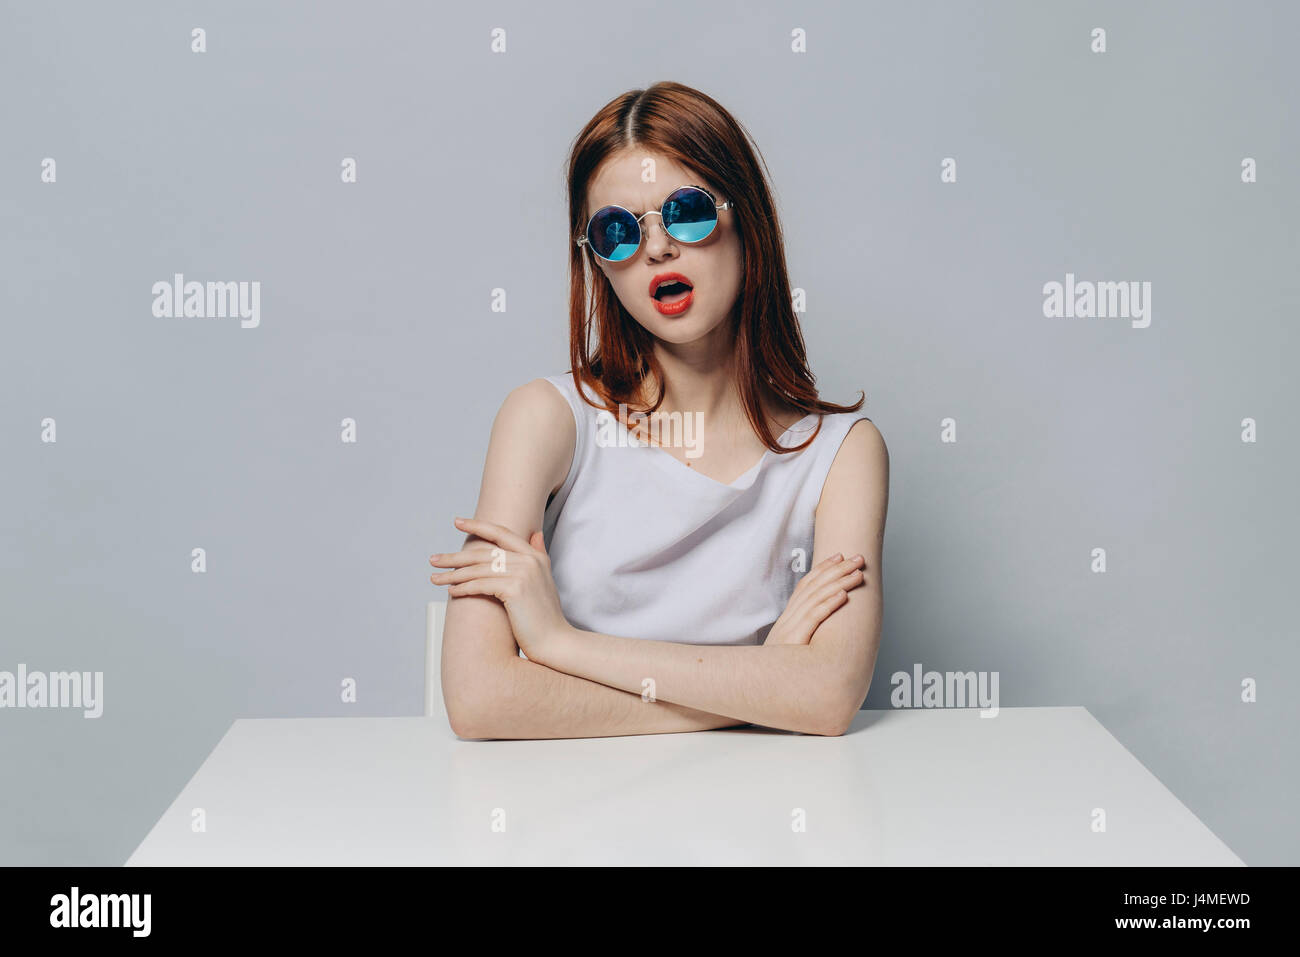 Caucasian woman with attitude sitting at table wearing sunglasses Stock Photo